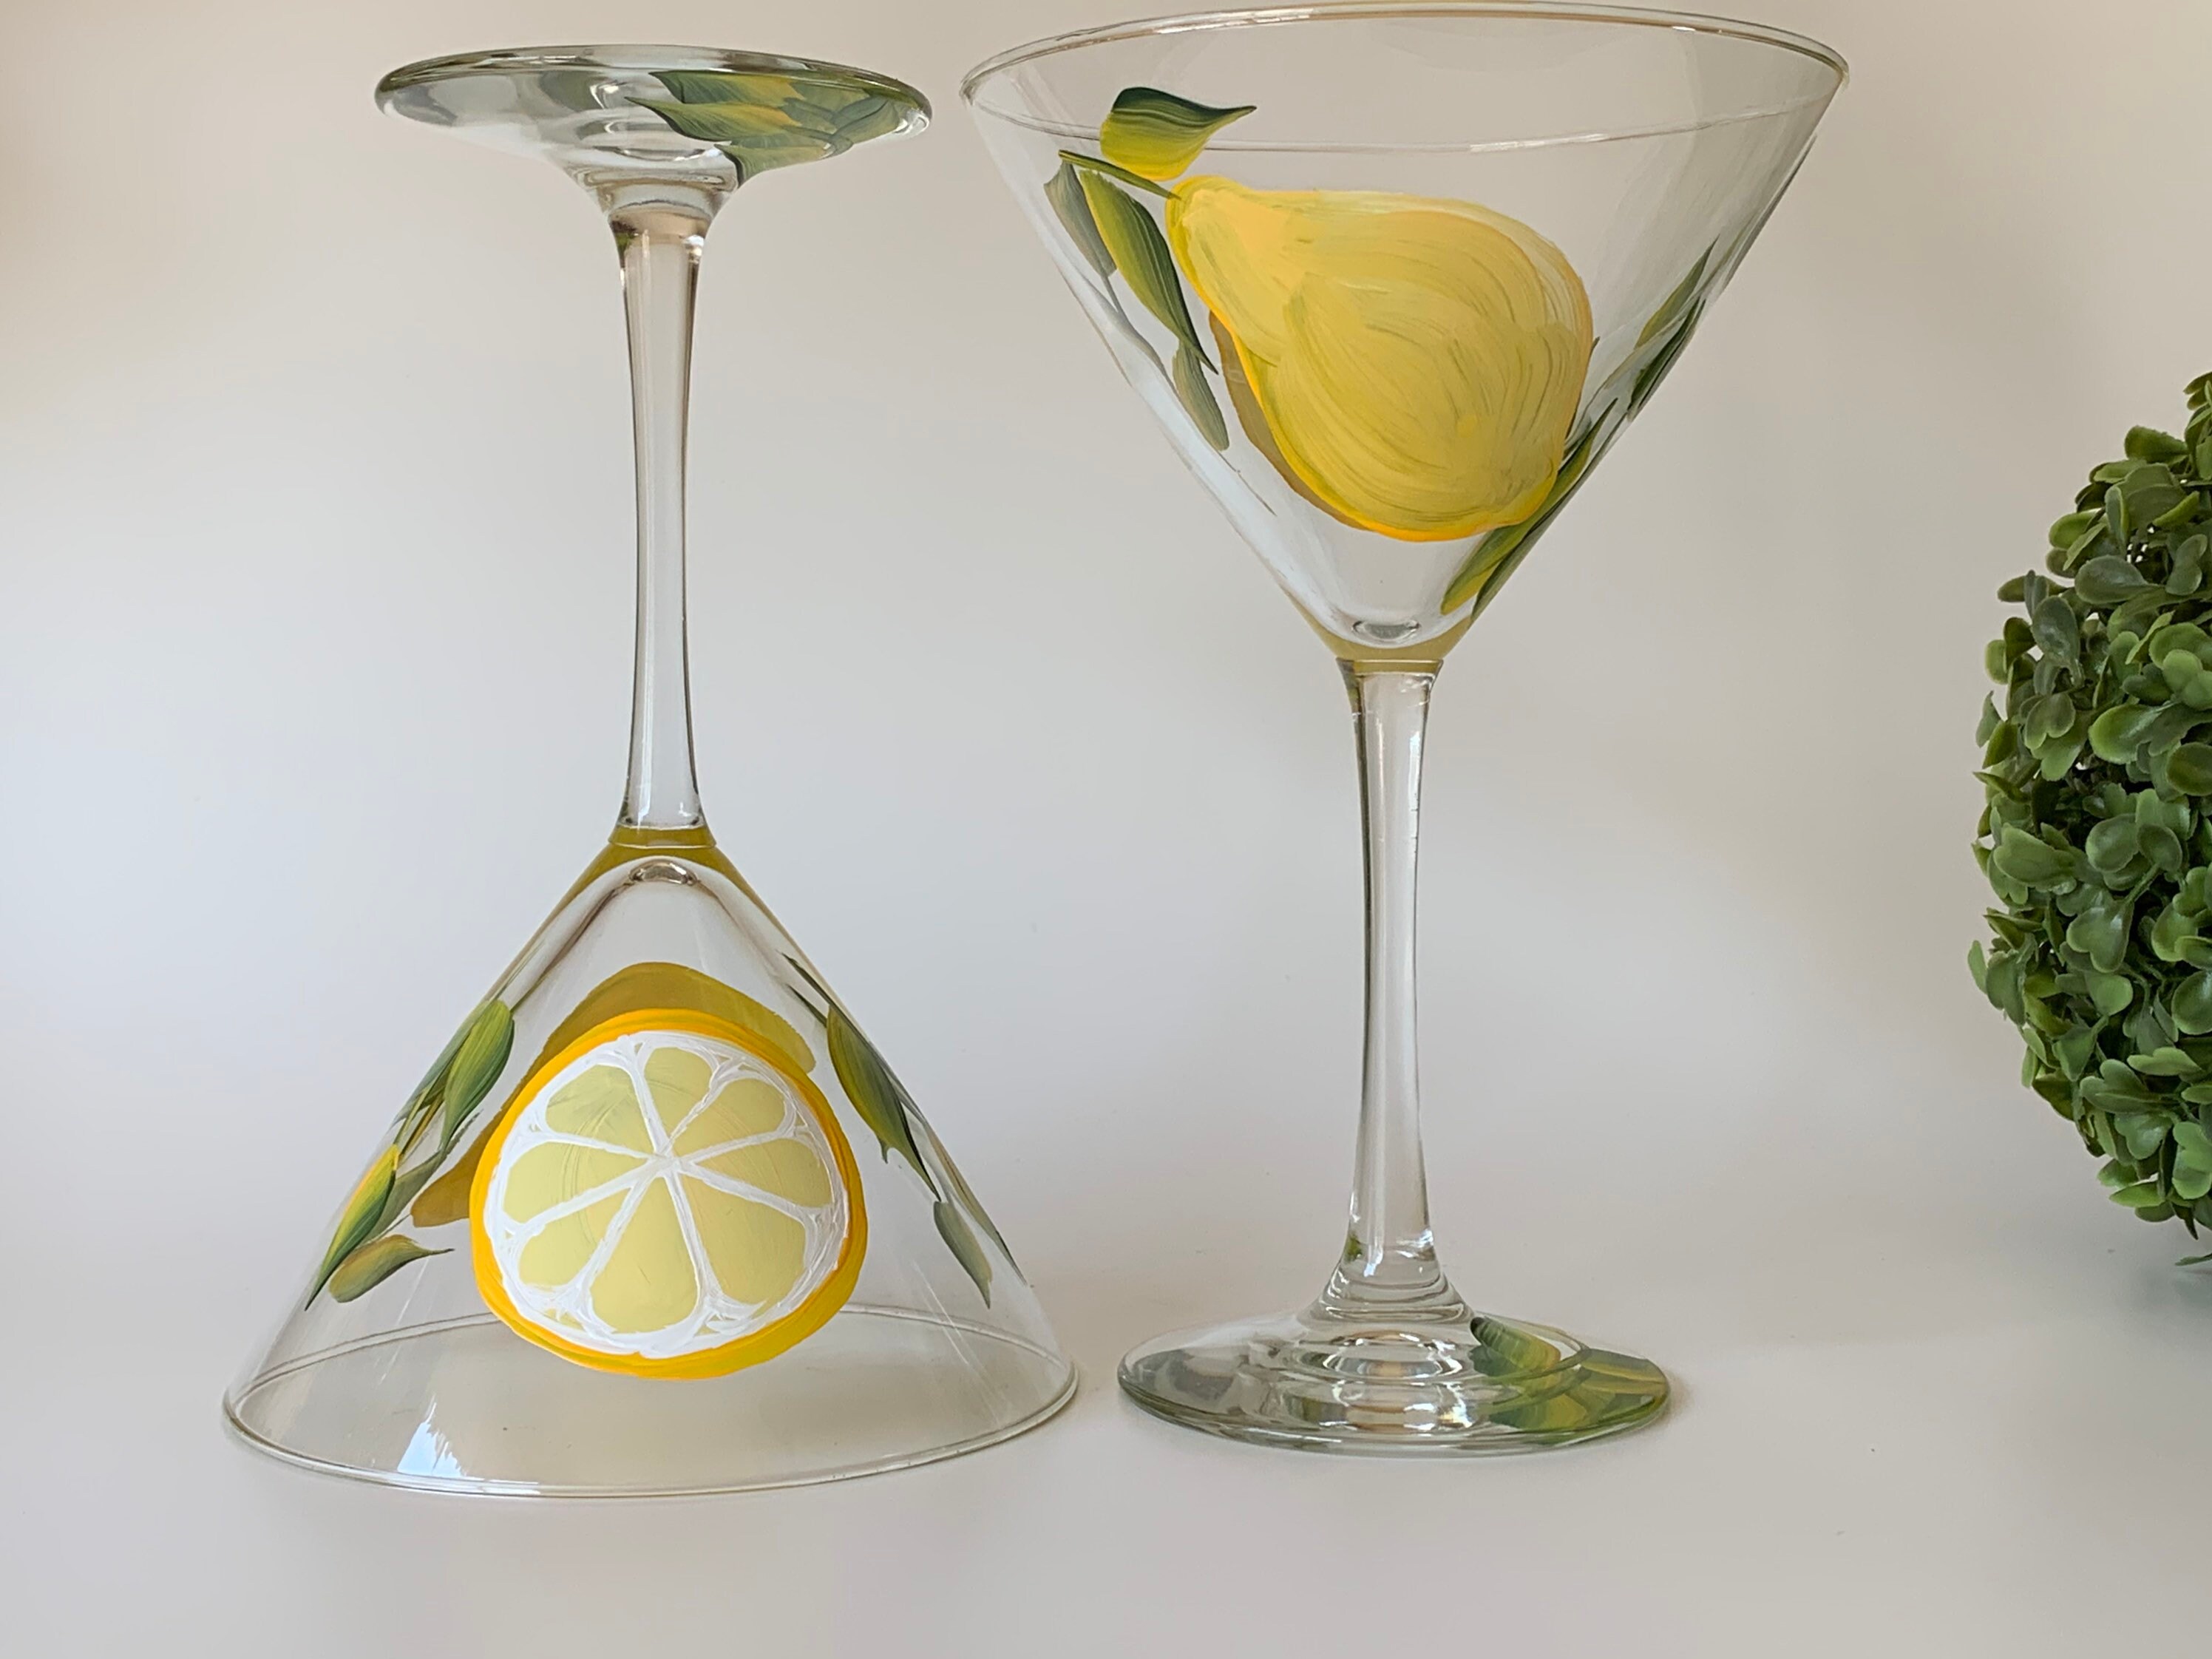 Glasses of Lemon Drop Martini Cocktail with Zest on Wooden Table Stock  Image - Image of aperitif, lemon: 156848065